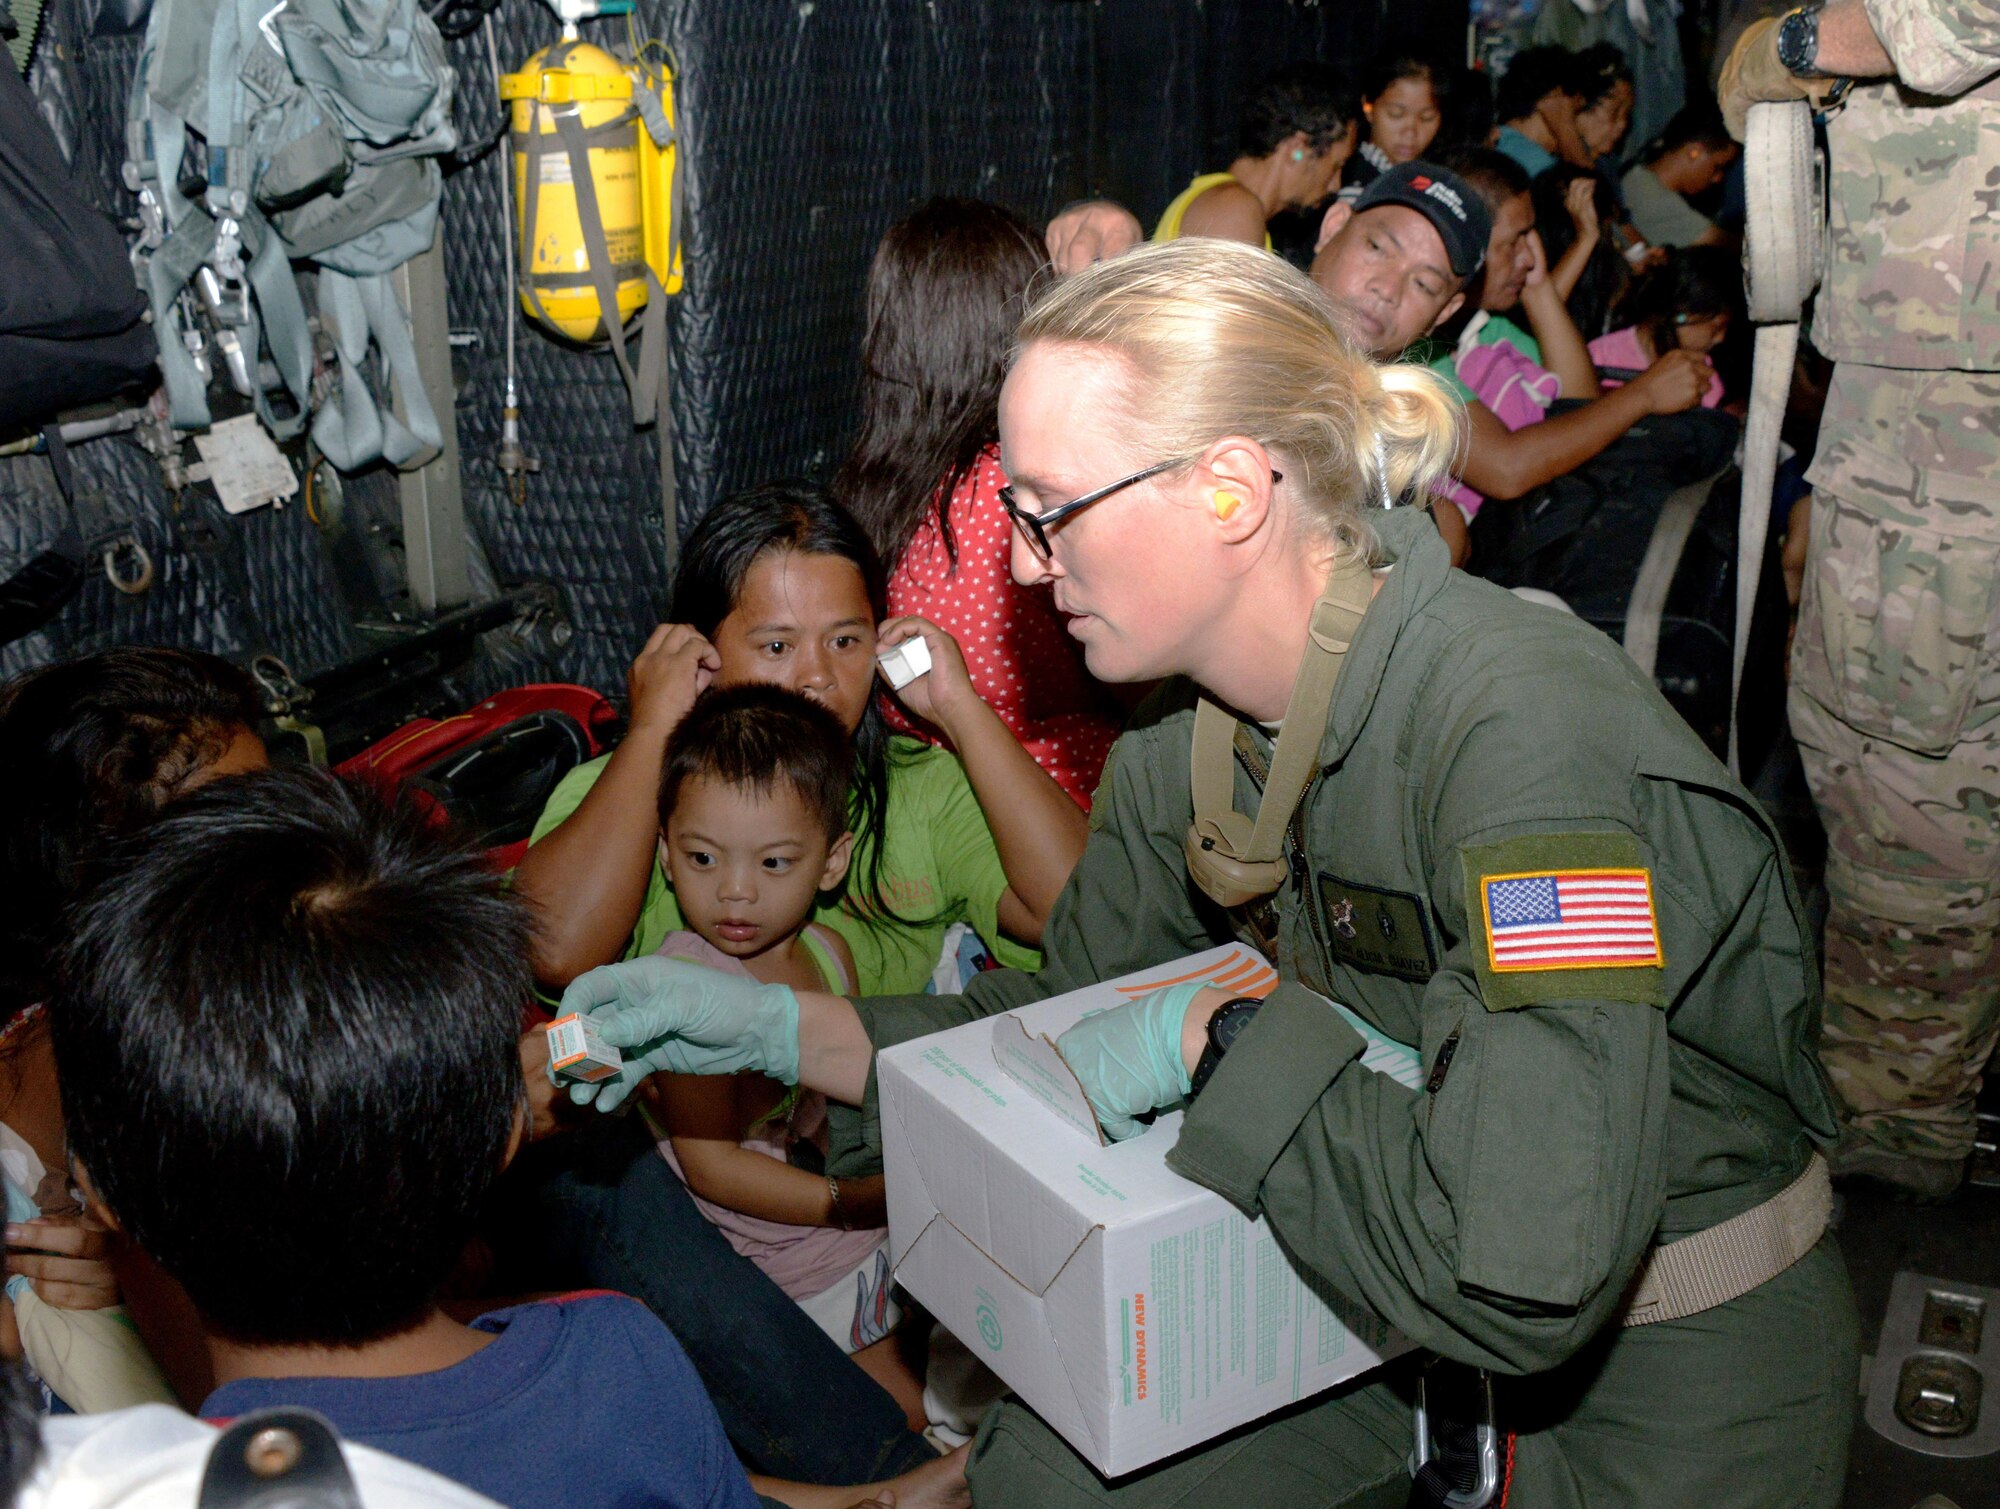 Staff Sgt. Alicia Chavez passes out ear plugs to displaced people onboard an MC-130P Combat Shadow Nov. 14, 2013, as they are transported from Tacloban Airport to Manila, Philippines. Air Force Special Operations Command Airmen are deployed in support of Operation Damayan, enabling night operations to facilitate the flow of aid. The role of U.S. military forces during any foreign humanitarian assistance event is to rapidly respond to mitigate human suffering and prevent further loss of life. Chavez is a 353rd Special Operations Support Squadron independent duty medical technician. (U.S. Air Force photo/Tech. Sgt. Kristine Dreyer)